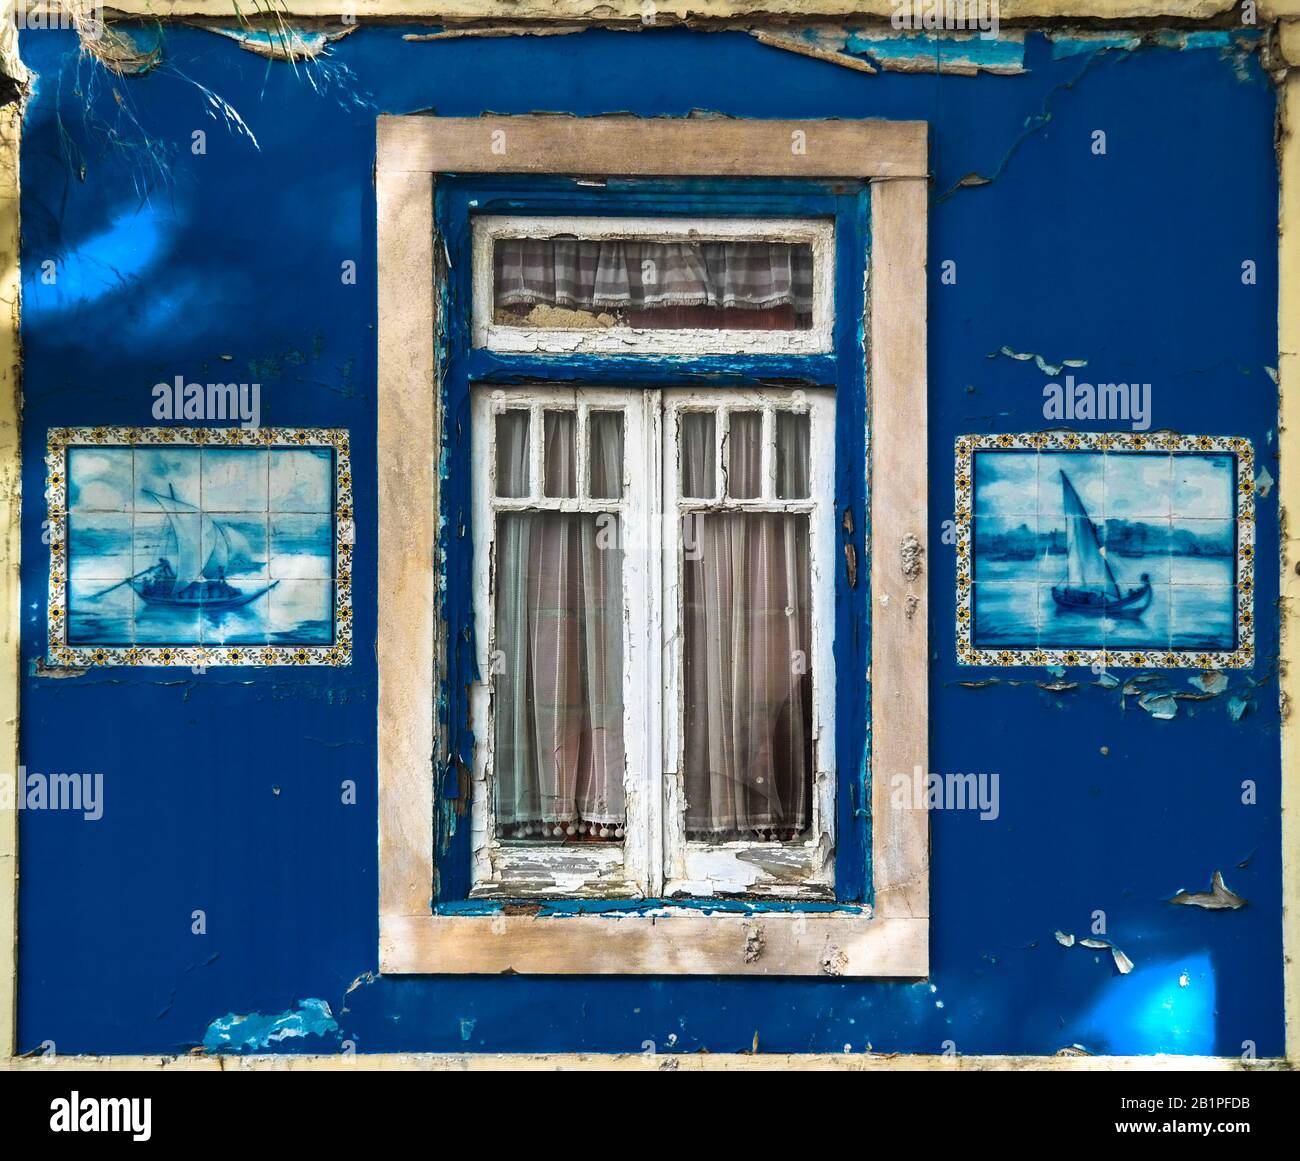 Lisbon. Old window with beautiful tile pictures. PANTONE CLASSIC BLUE 19-4052 Stock Photo